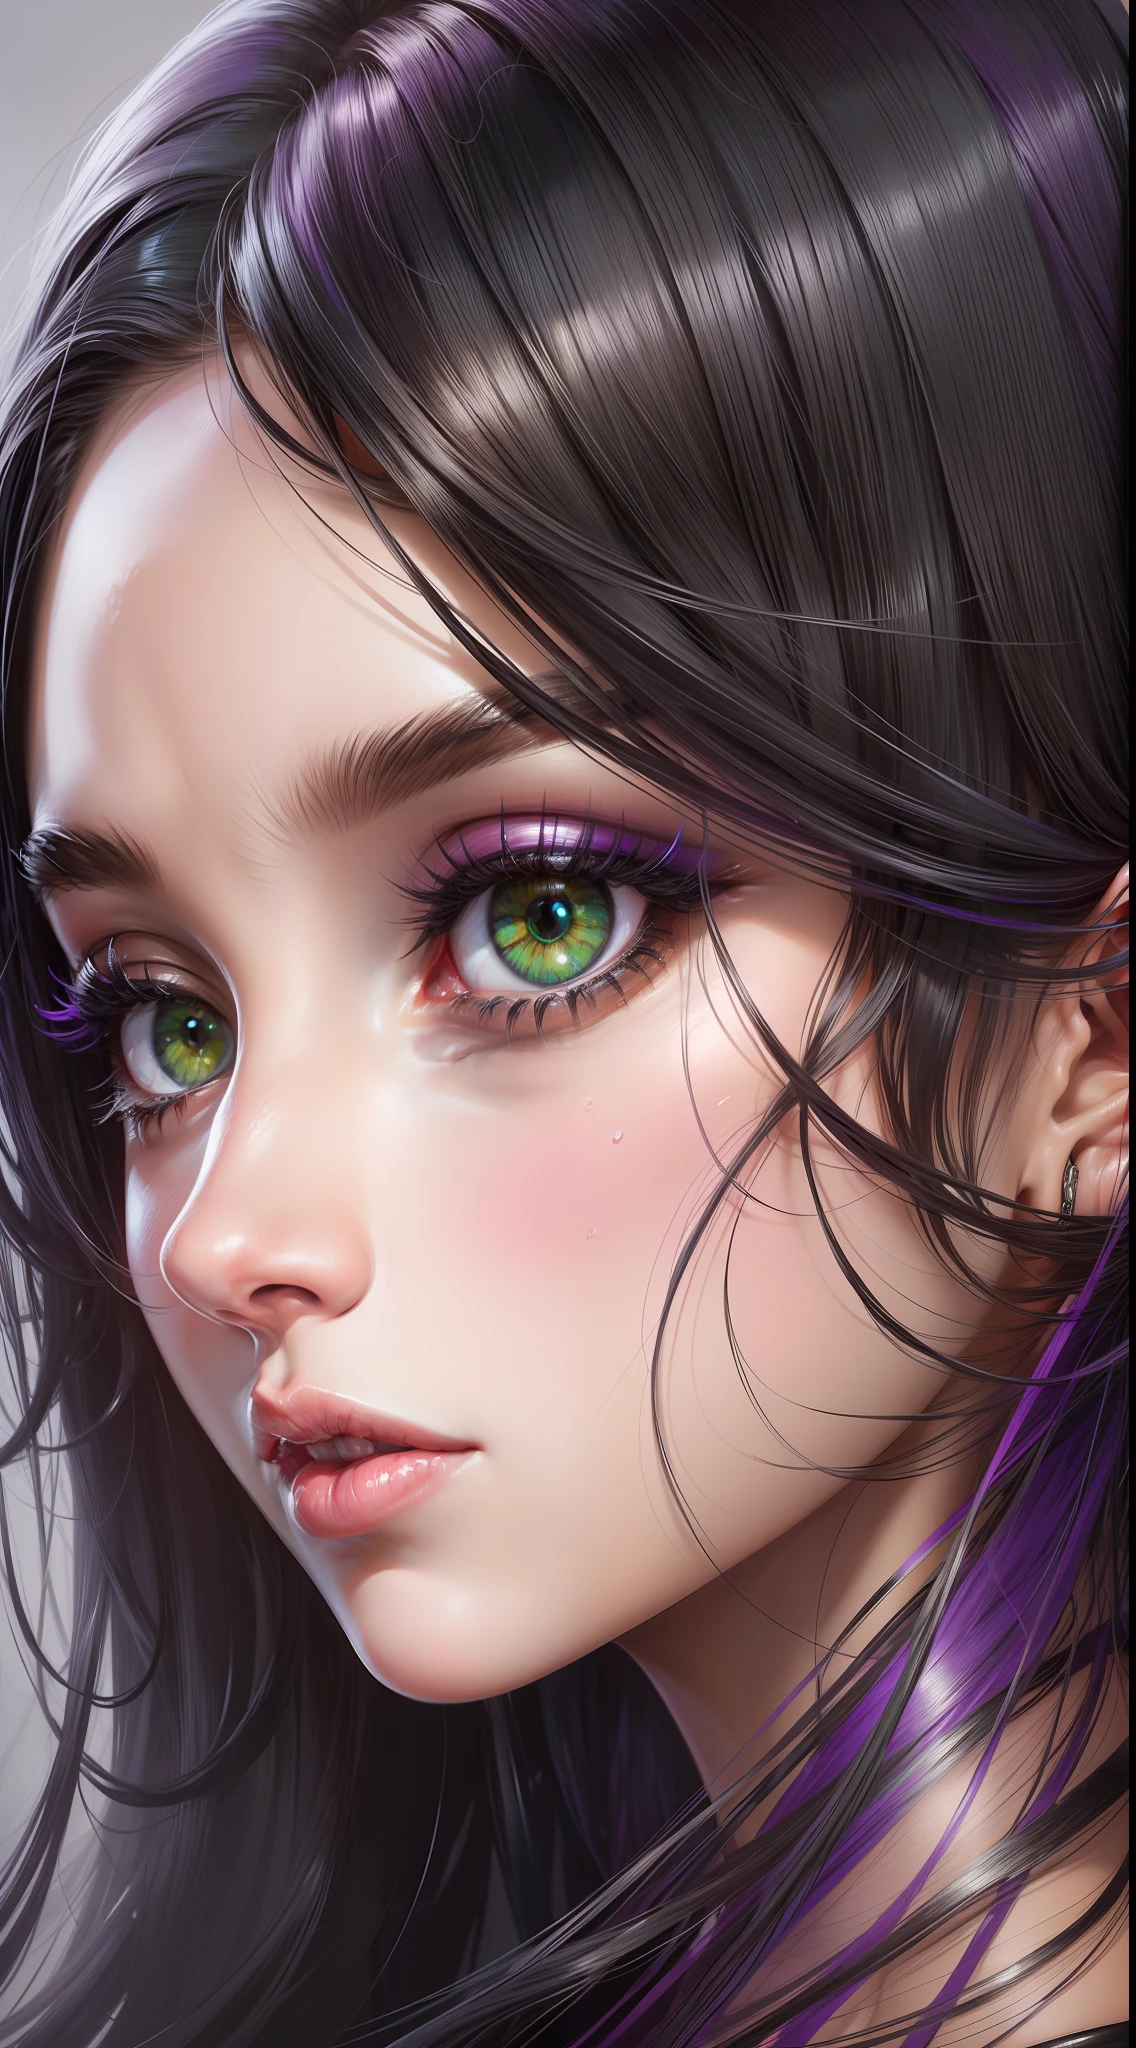 Get a close-up view of the face of a captivating young European girl, her half long black hair cascading gently around her face, her alluring green eyes captivating with their enigmatic gaze, a  nose adding a touch of elegance, her lips adorned with a captivating shade of purple lipstick, the image captured in a 9:16 aspect ratio, the portrait bringing her detailed facial features to life, Painting, executed with acrylic paints on a smooth canvas, using fine brushes to capture every nuance and intricacy